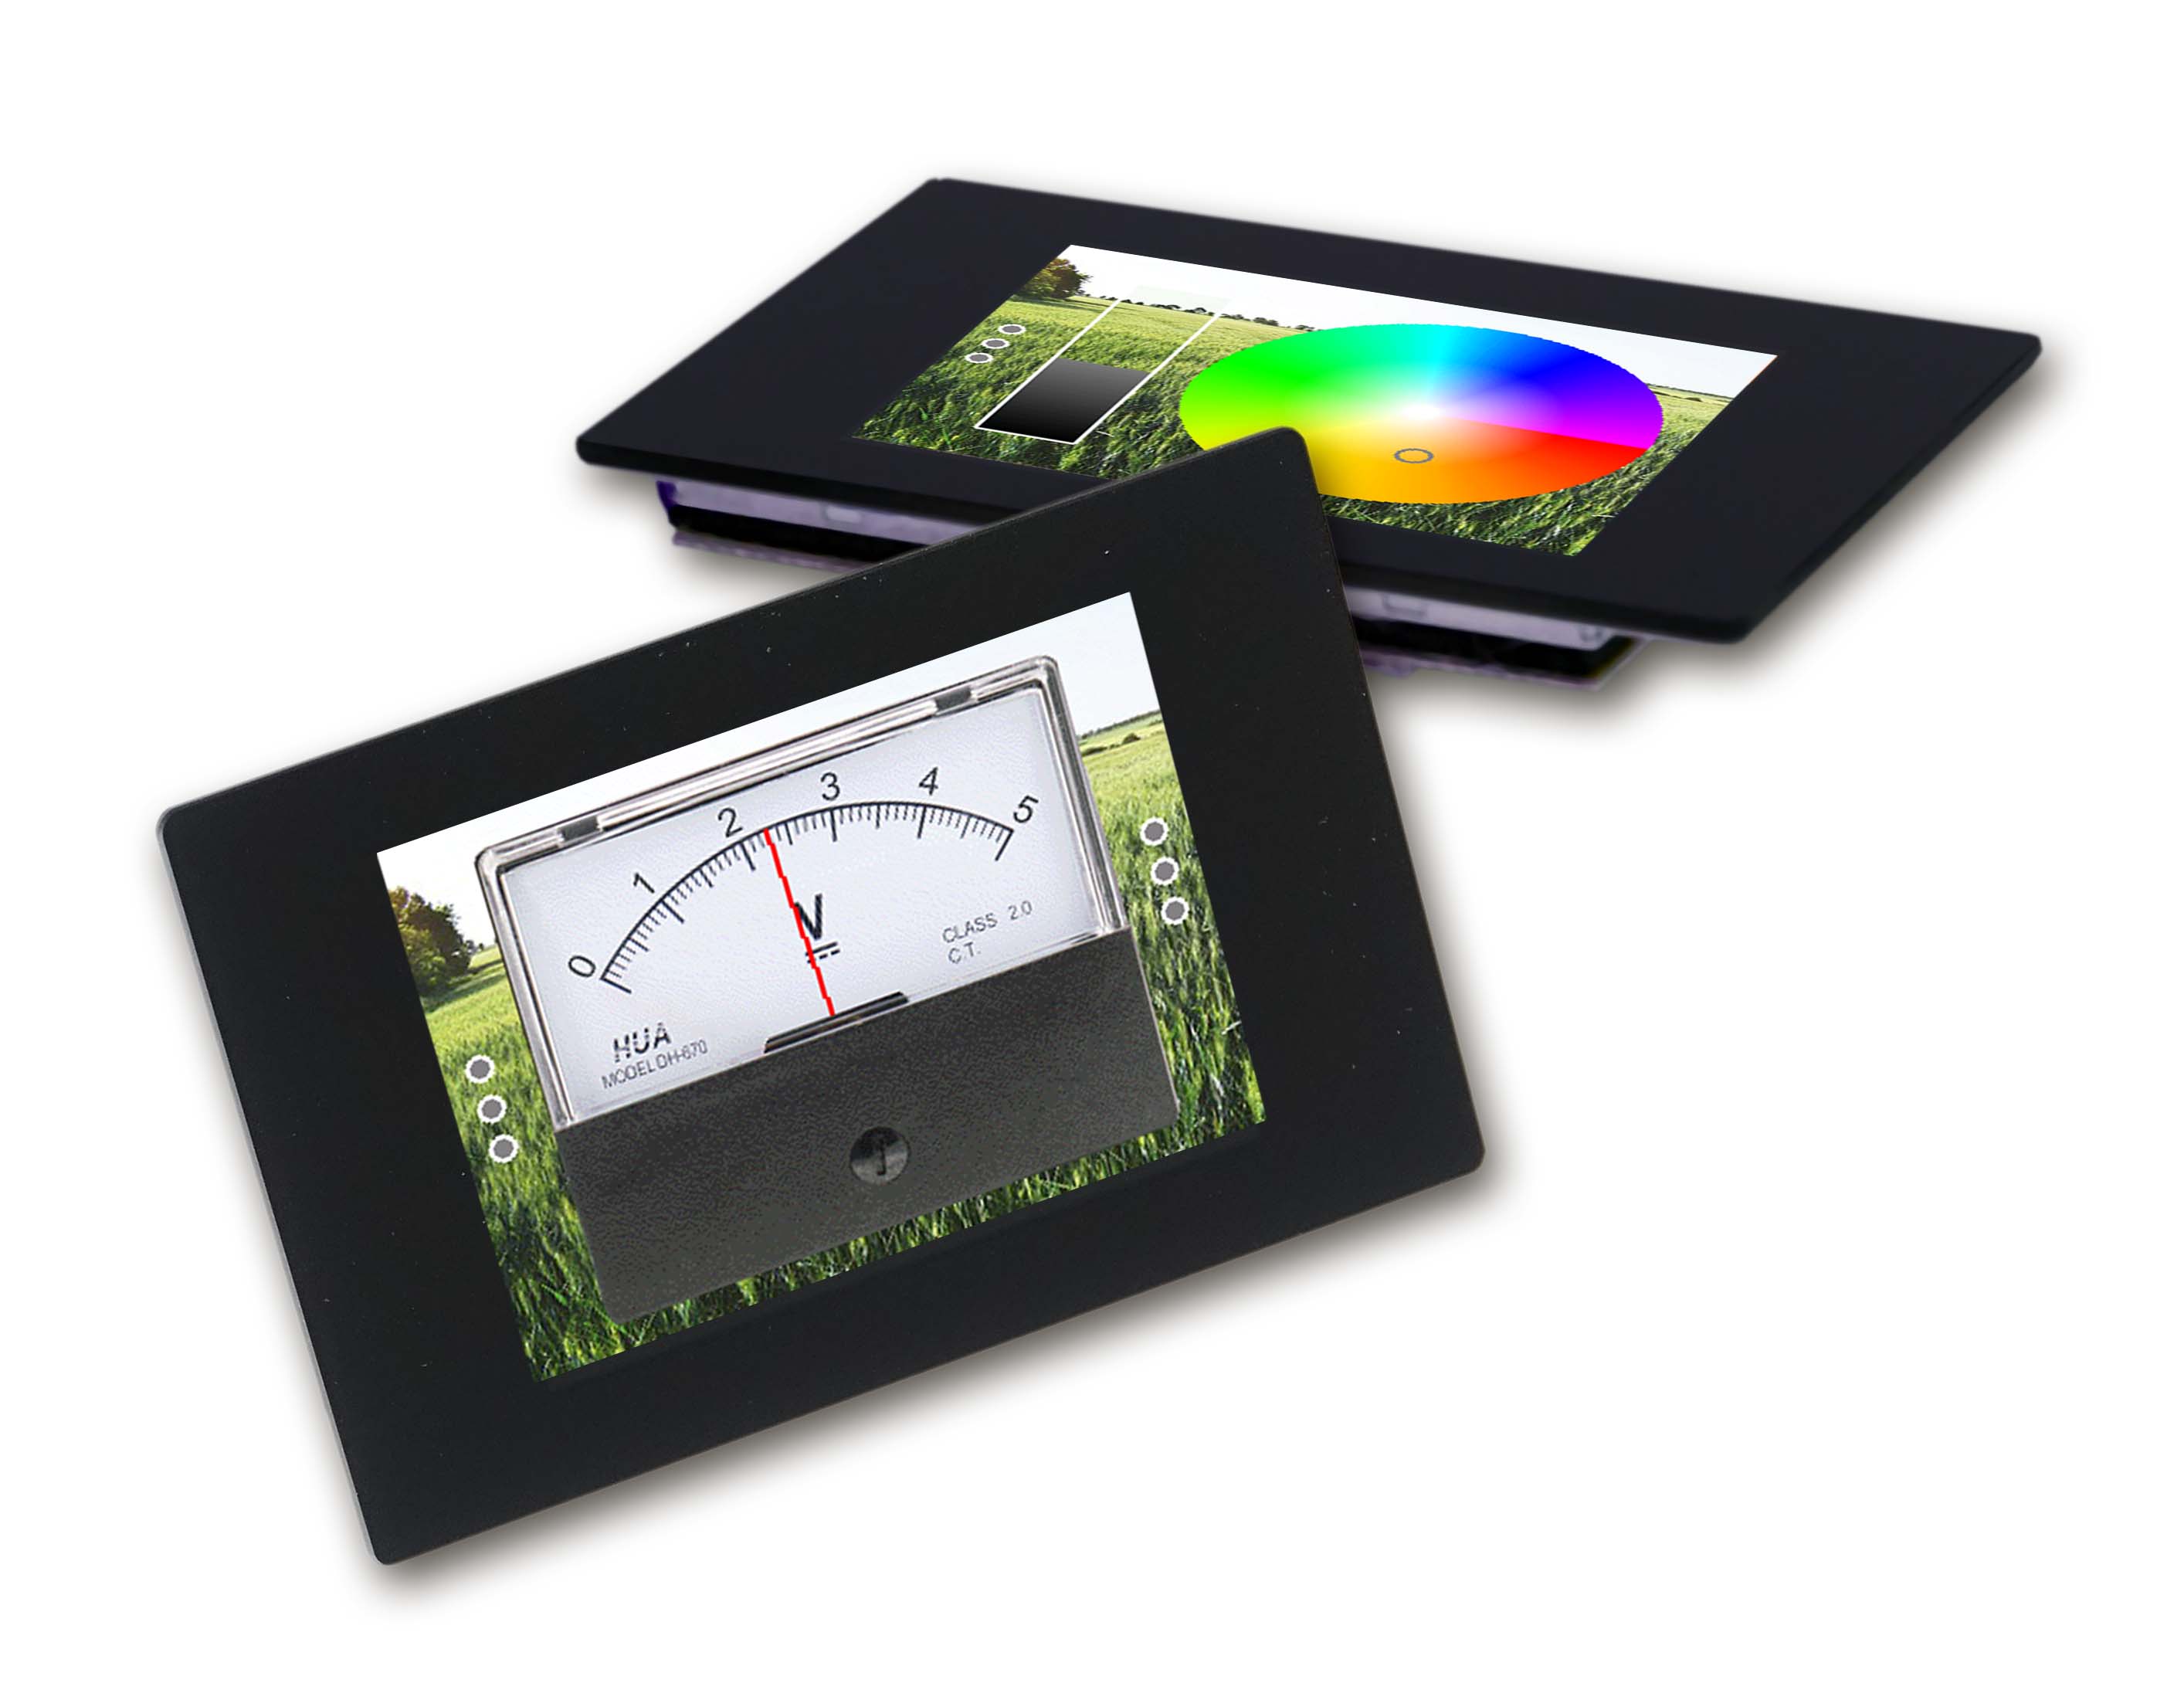 Intelligent displays LCD for home automation for display, control and regulation